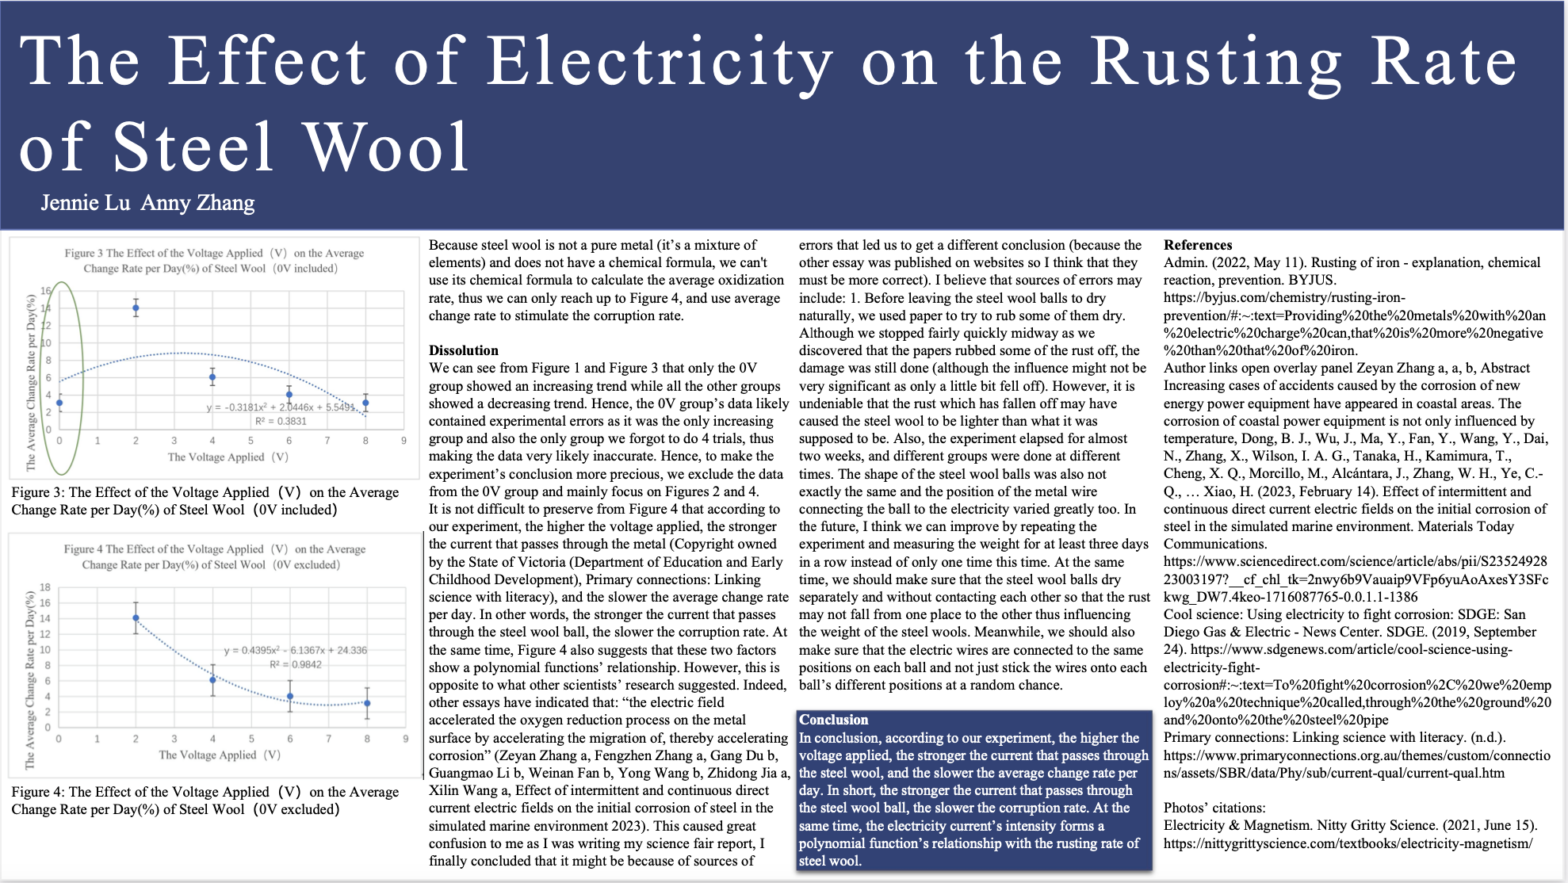 The Effect of Electricity on the Rusting Rate of Steel Wool